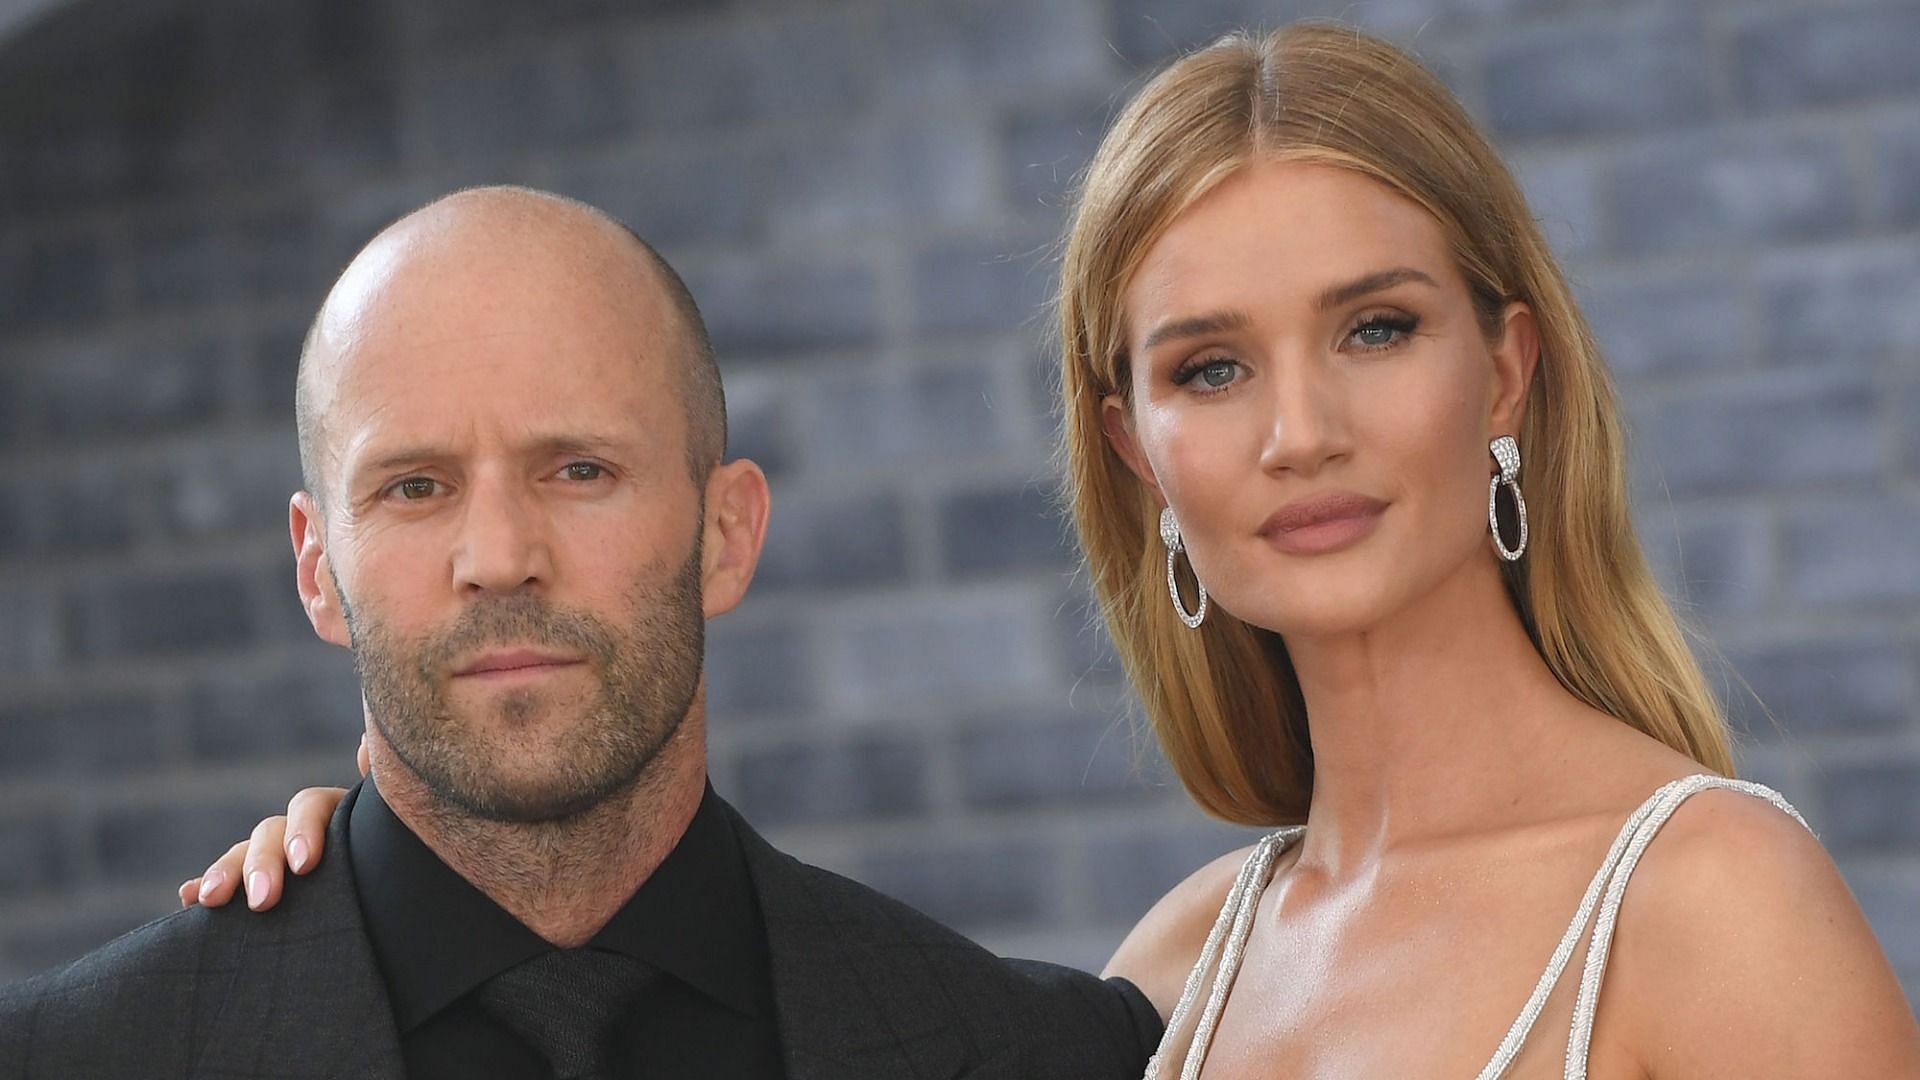 Huntington-Whiteley and Statham started dating in 2010 (Image via Robyn Beck/AFP/Getty Images)